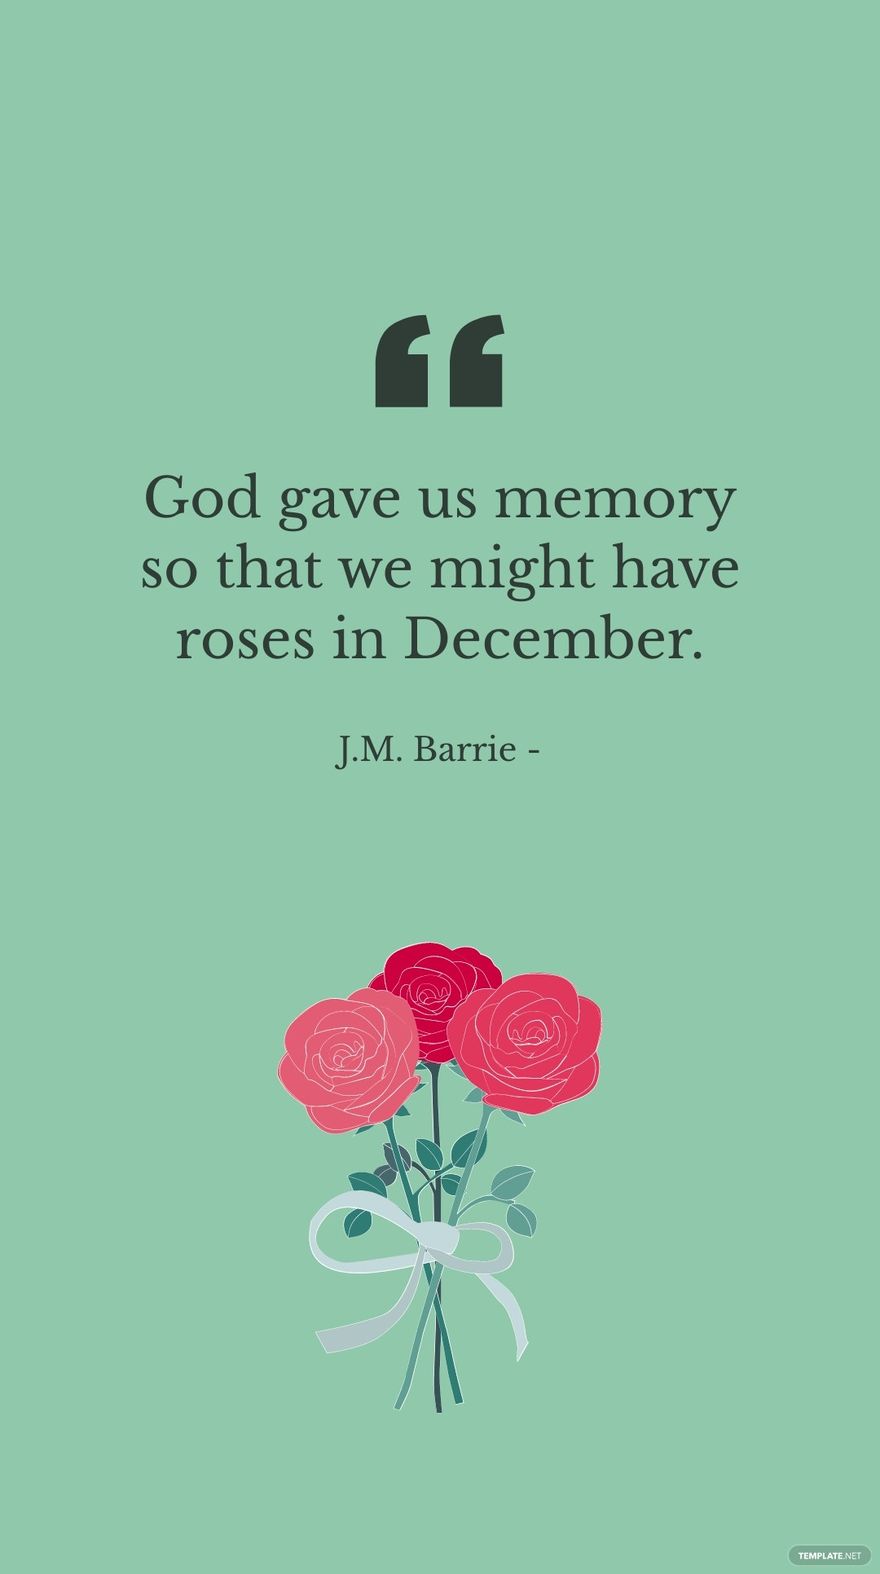 J.M. Barrie - God gave us memory so that we might have roses in December.